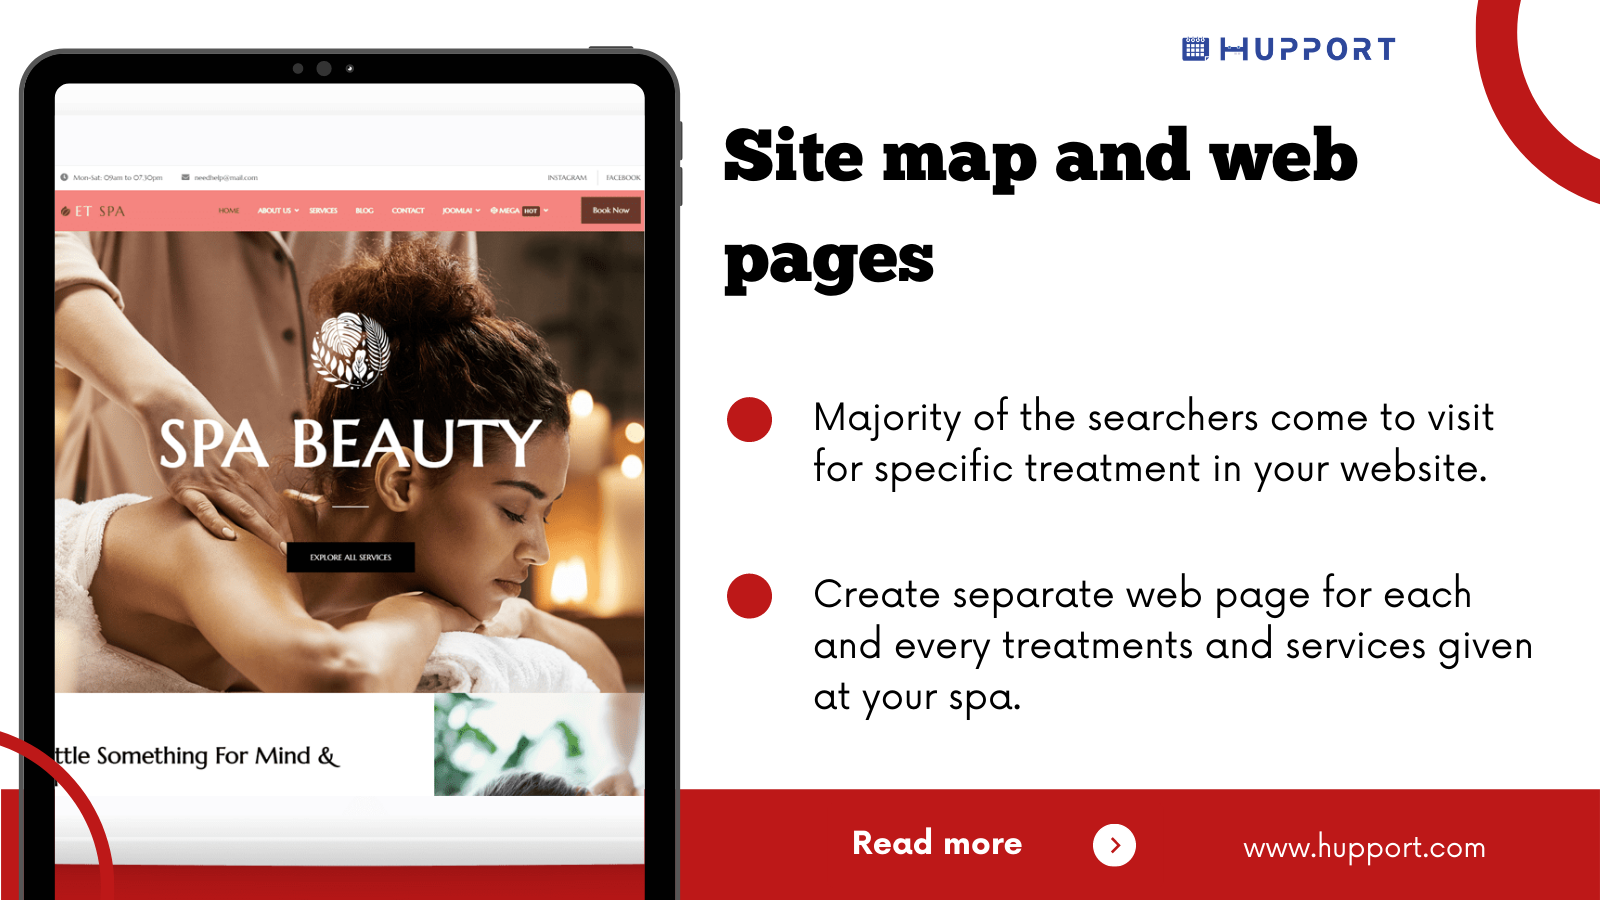 Site map and web pages for medical spa